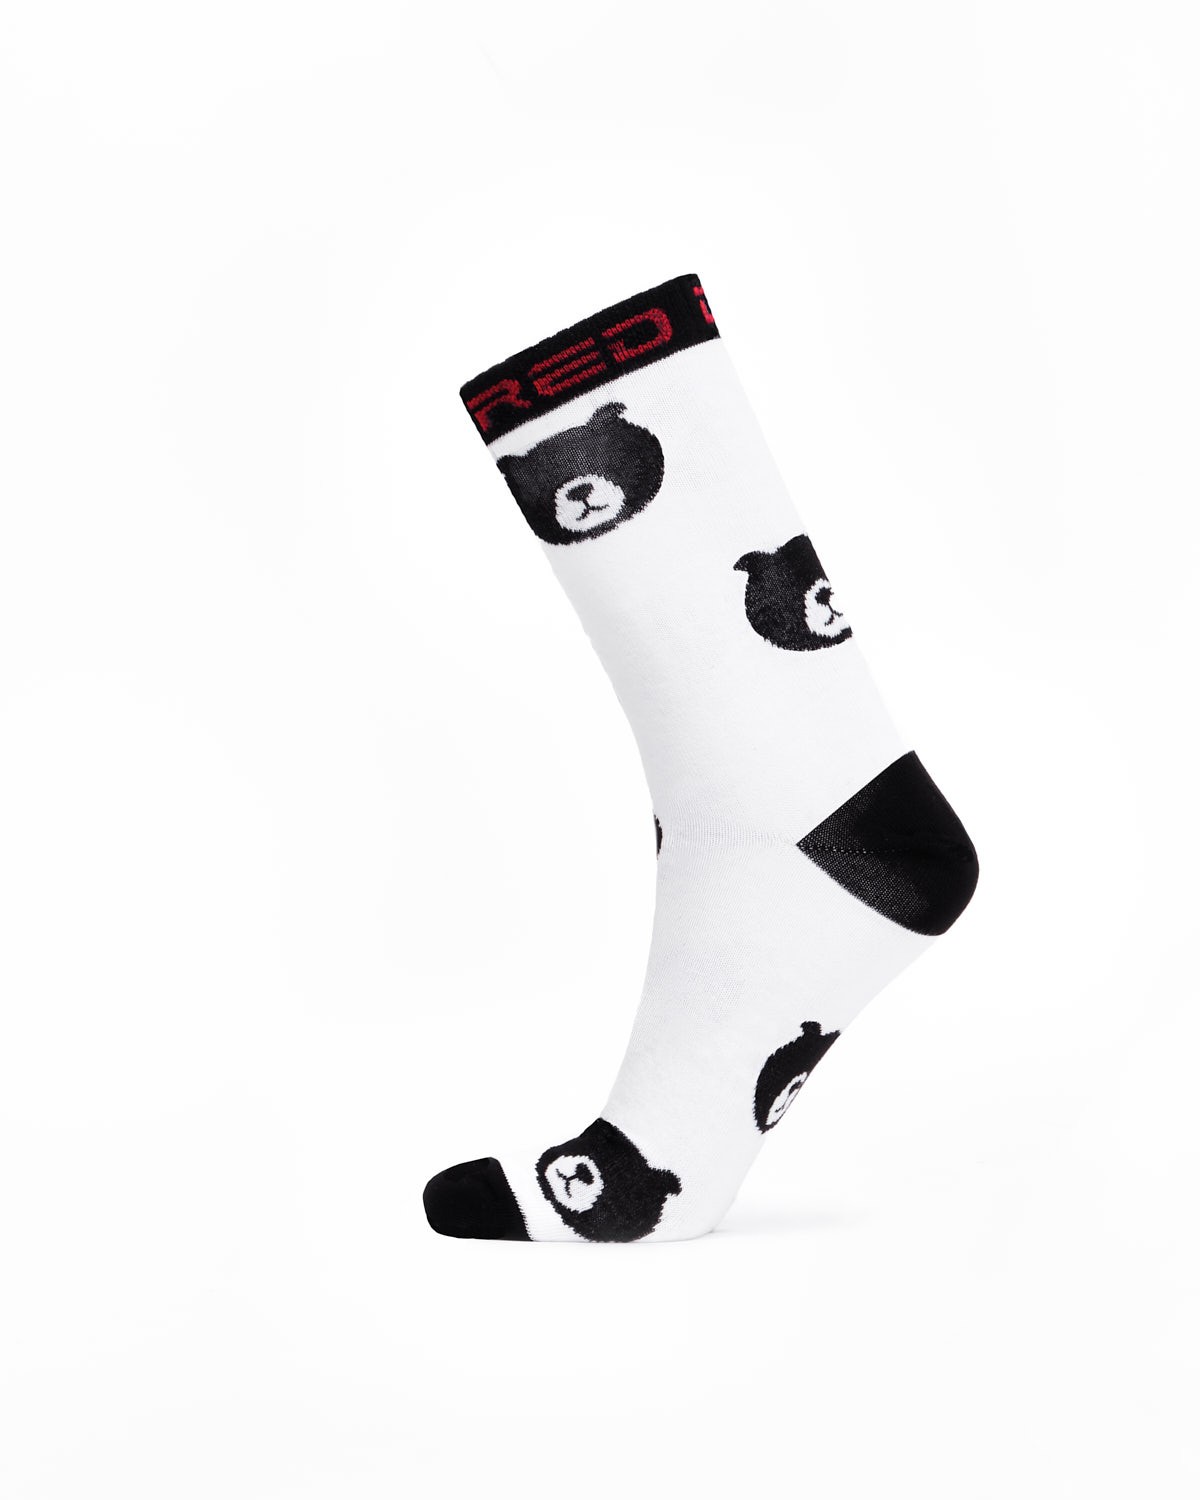 Red Zoo Grizzly Socks